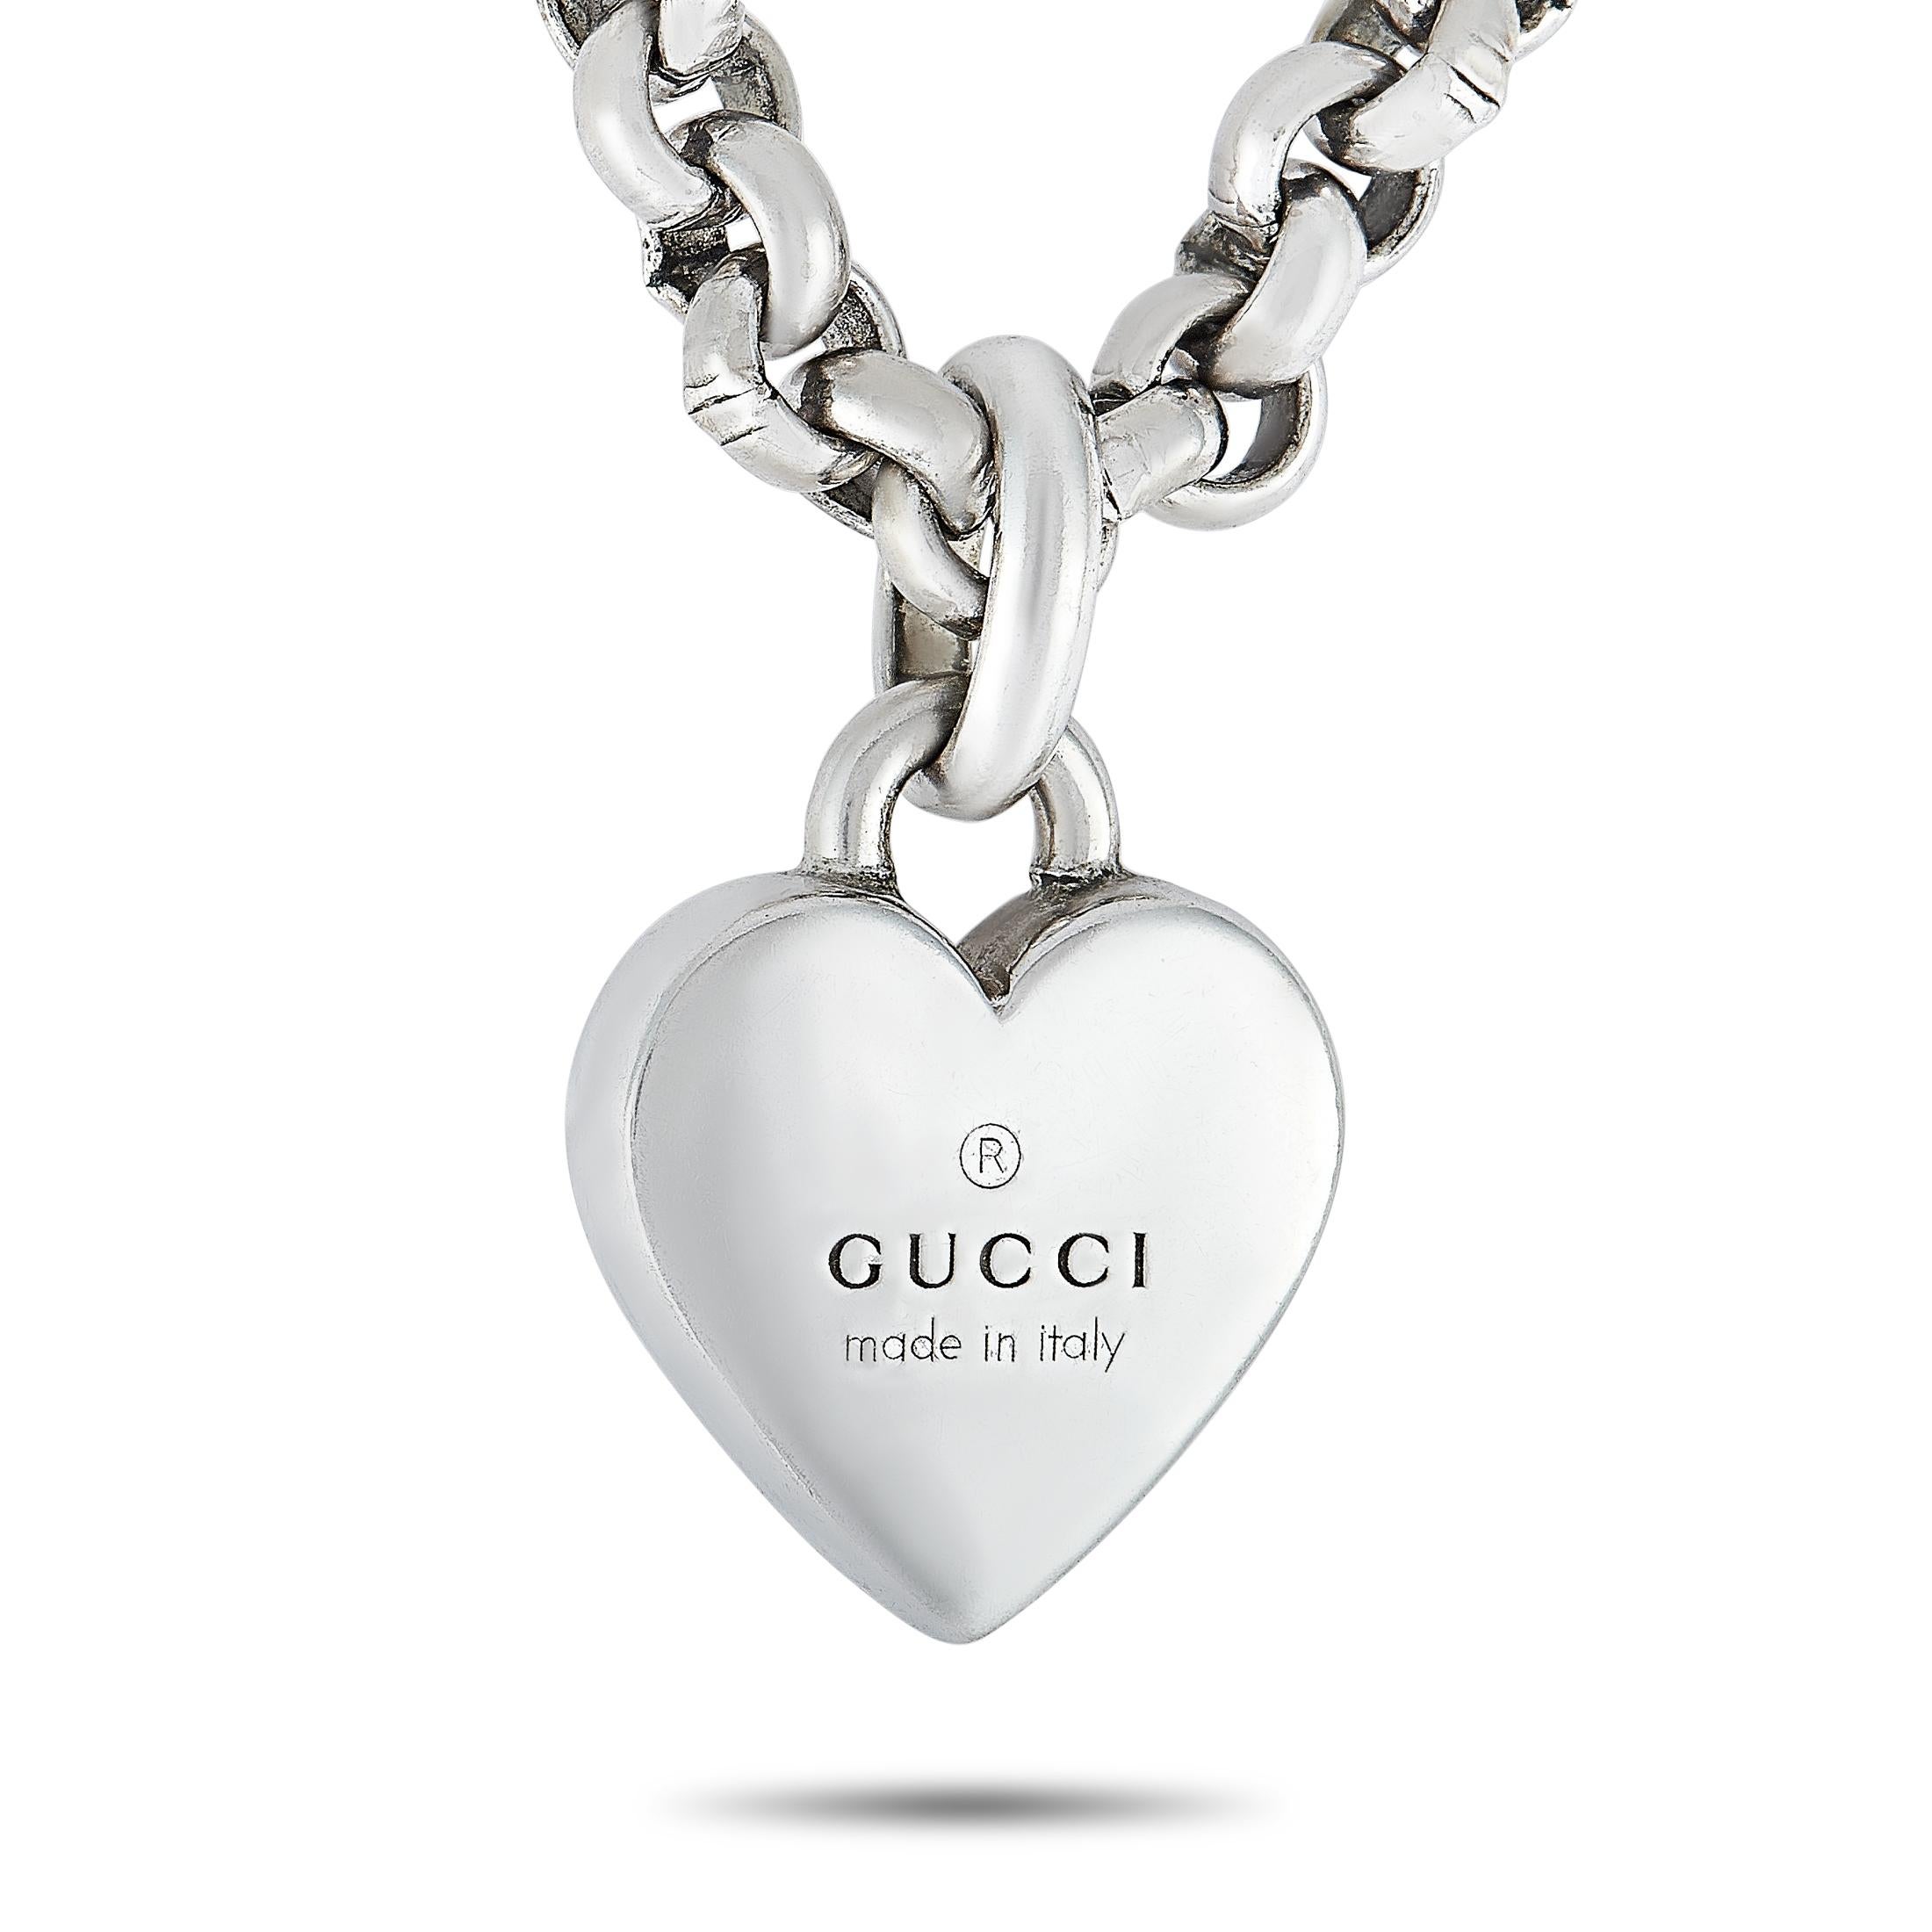 Gucci Heart Necklace - 3 For Sale on 1stDibs | gucci heart 